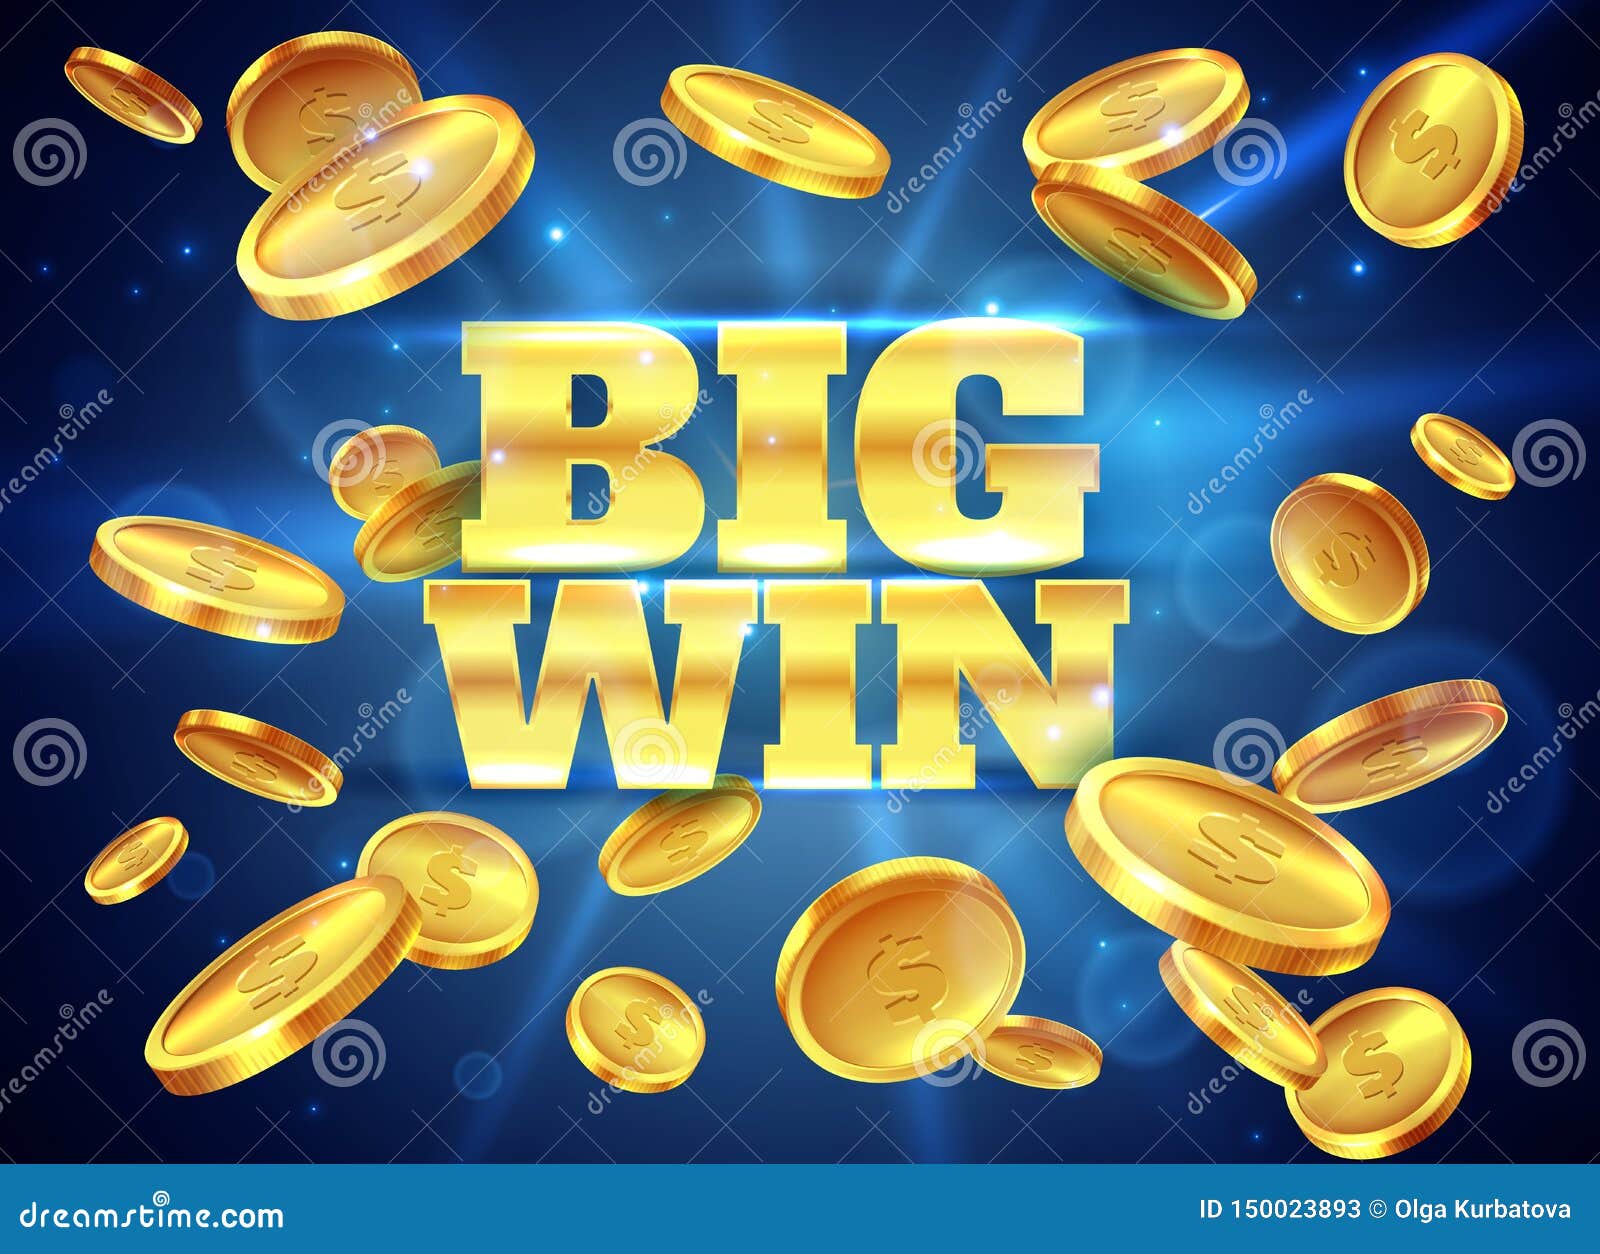 big win. prize label with gold flying coins, winning game. casino cash money jackpot gambling  abstract background